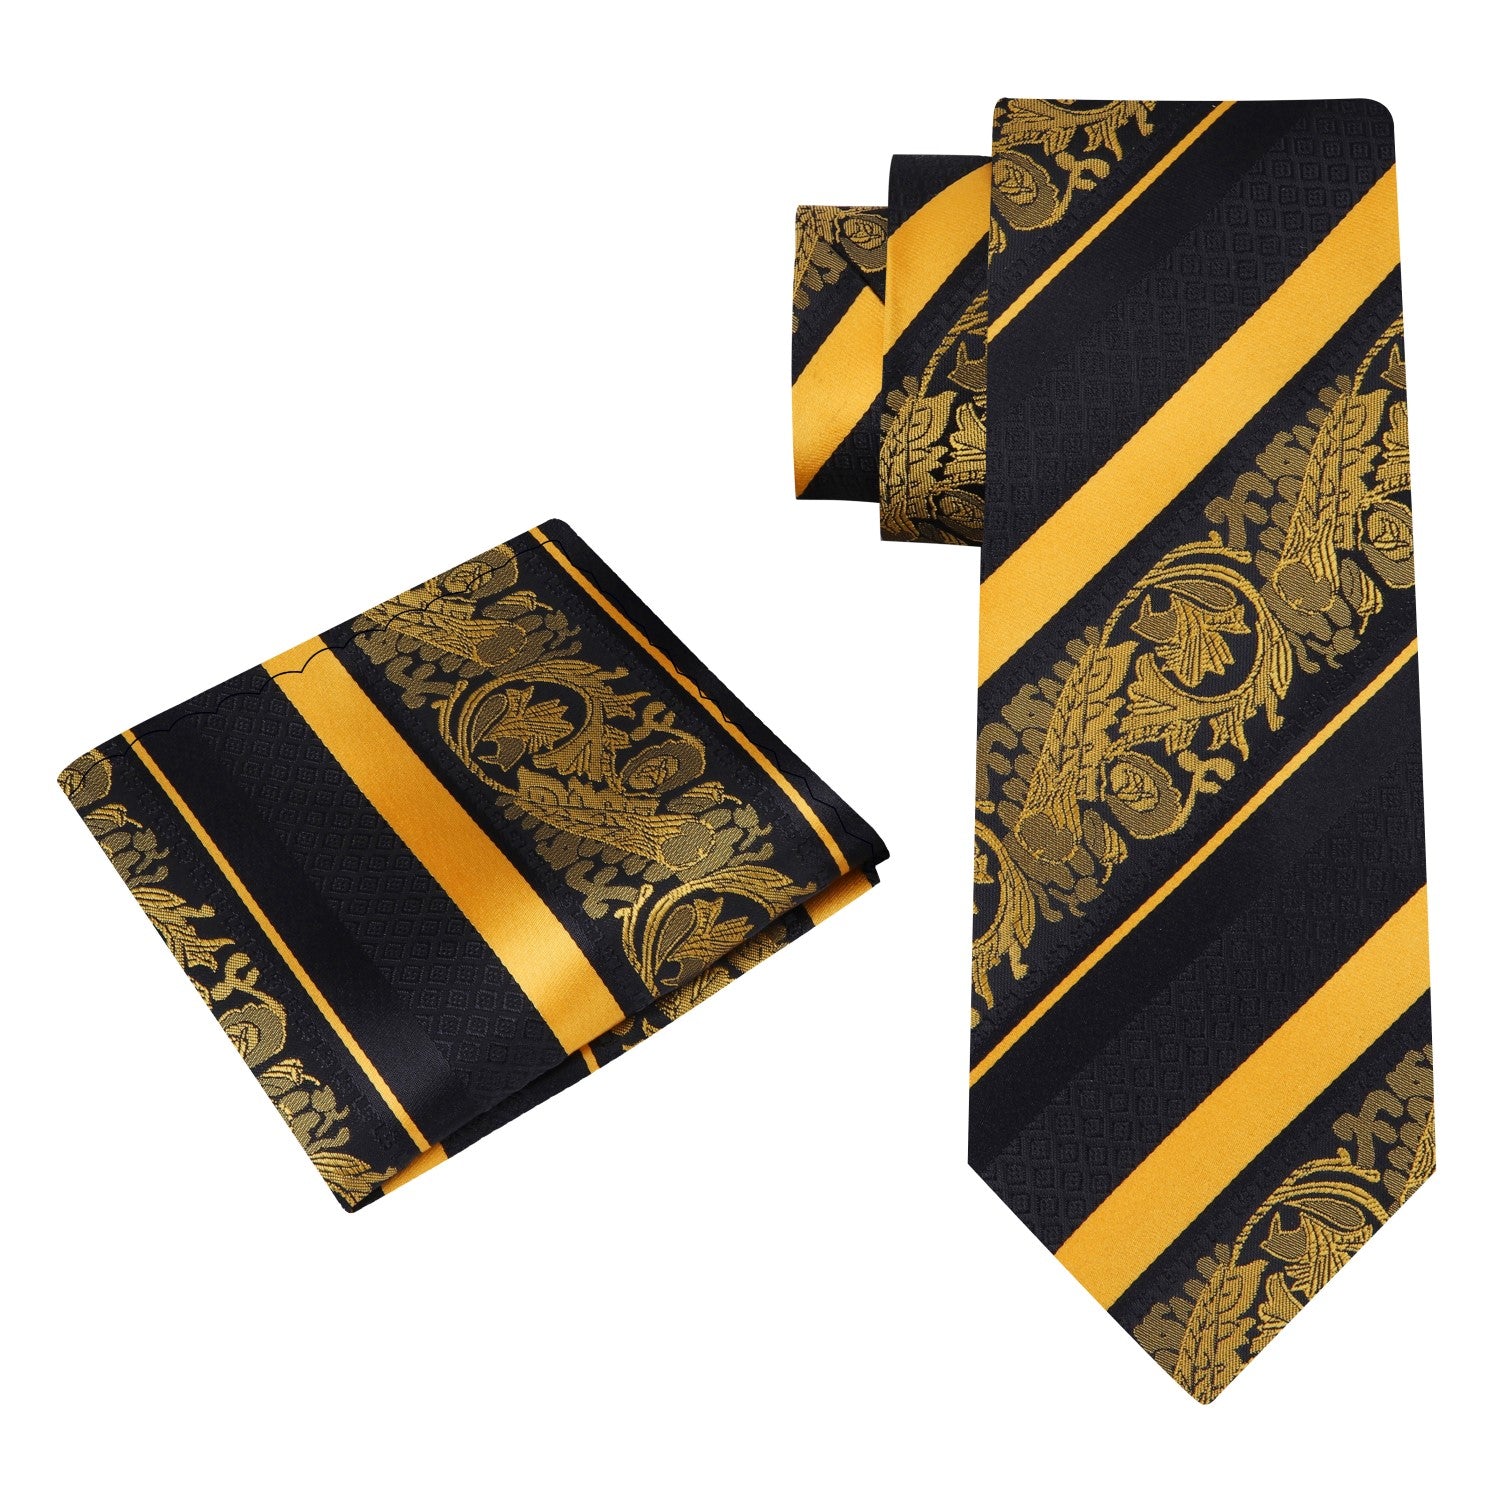 Alt View: Black, Yellow Intricate Paisley Tie and Pocket Square